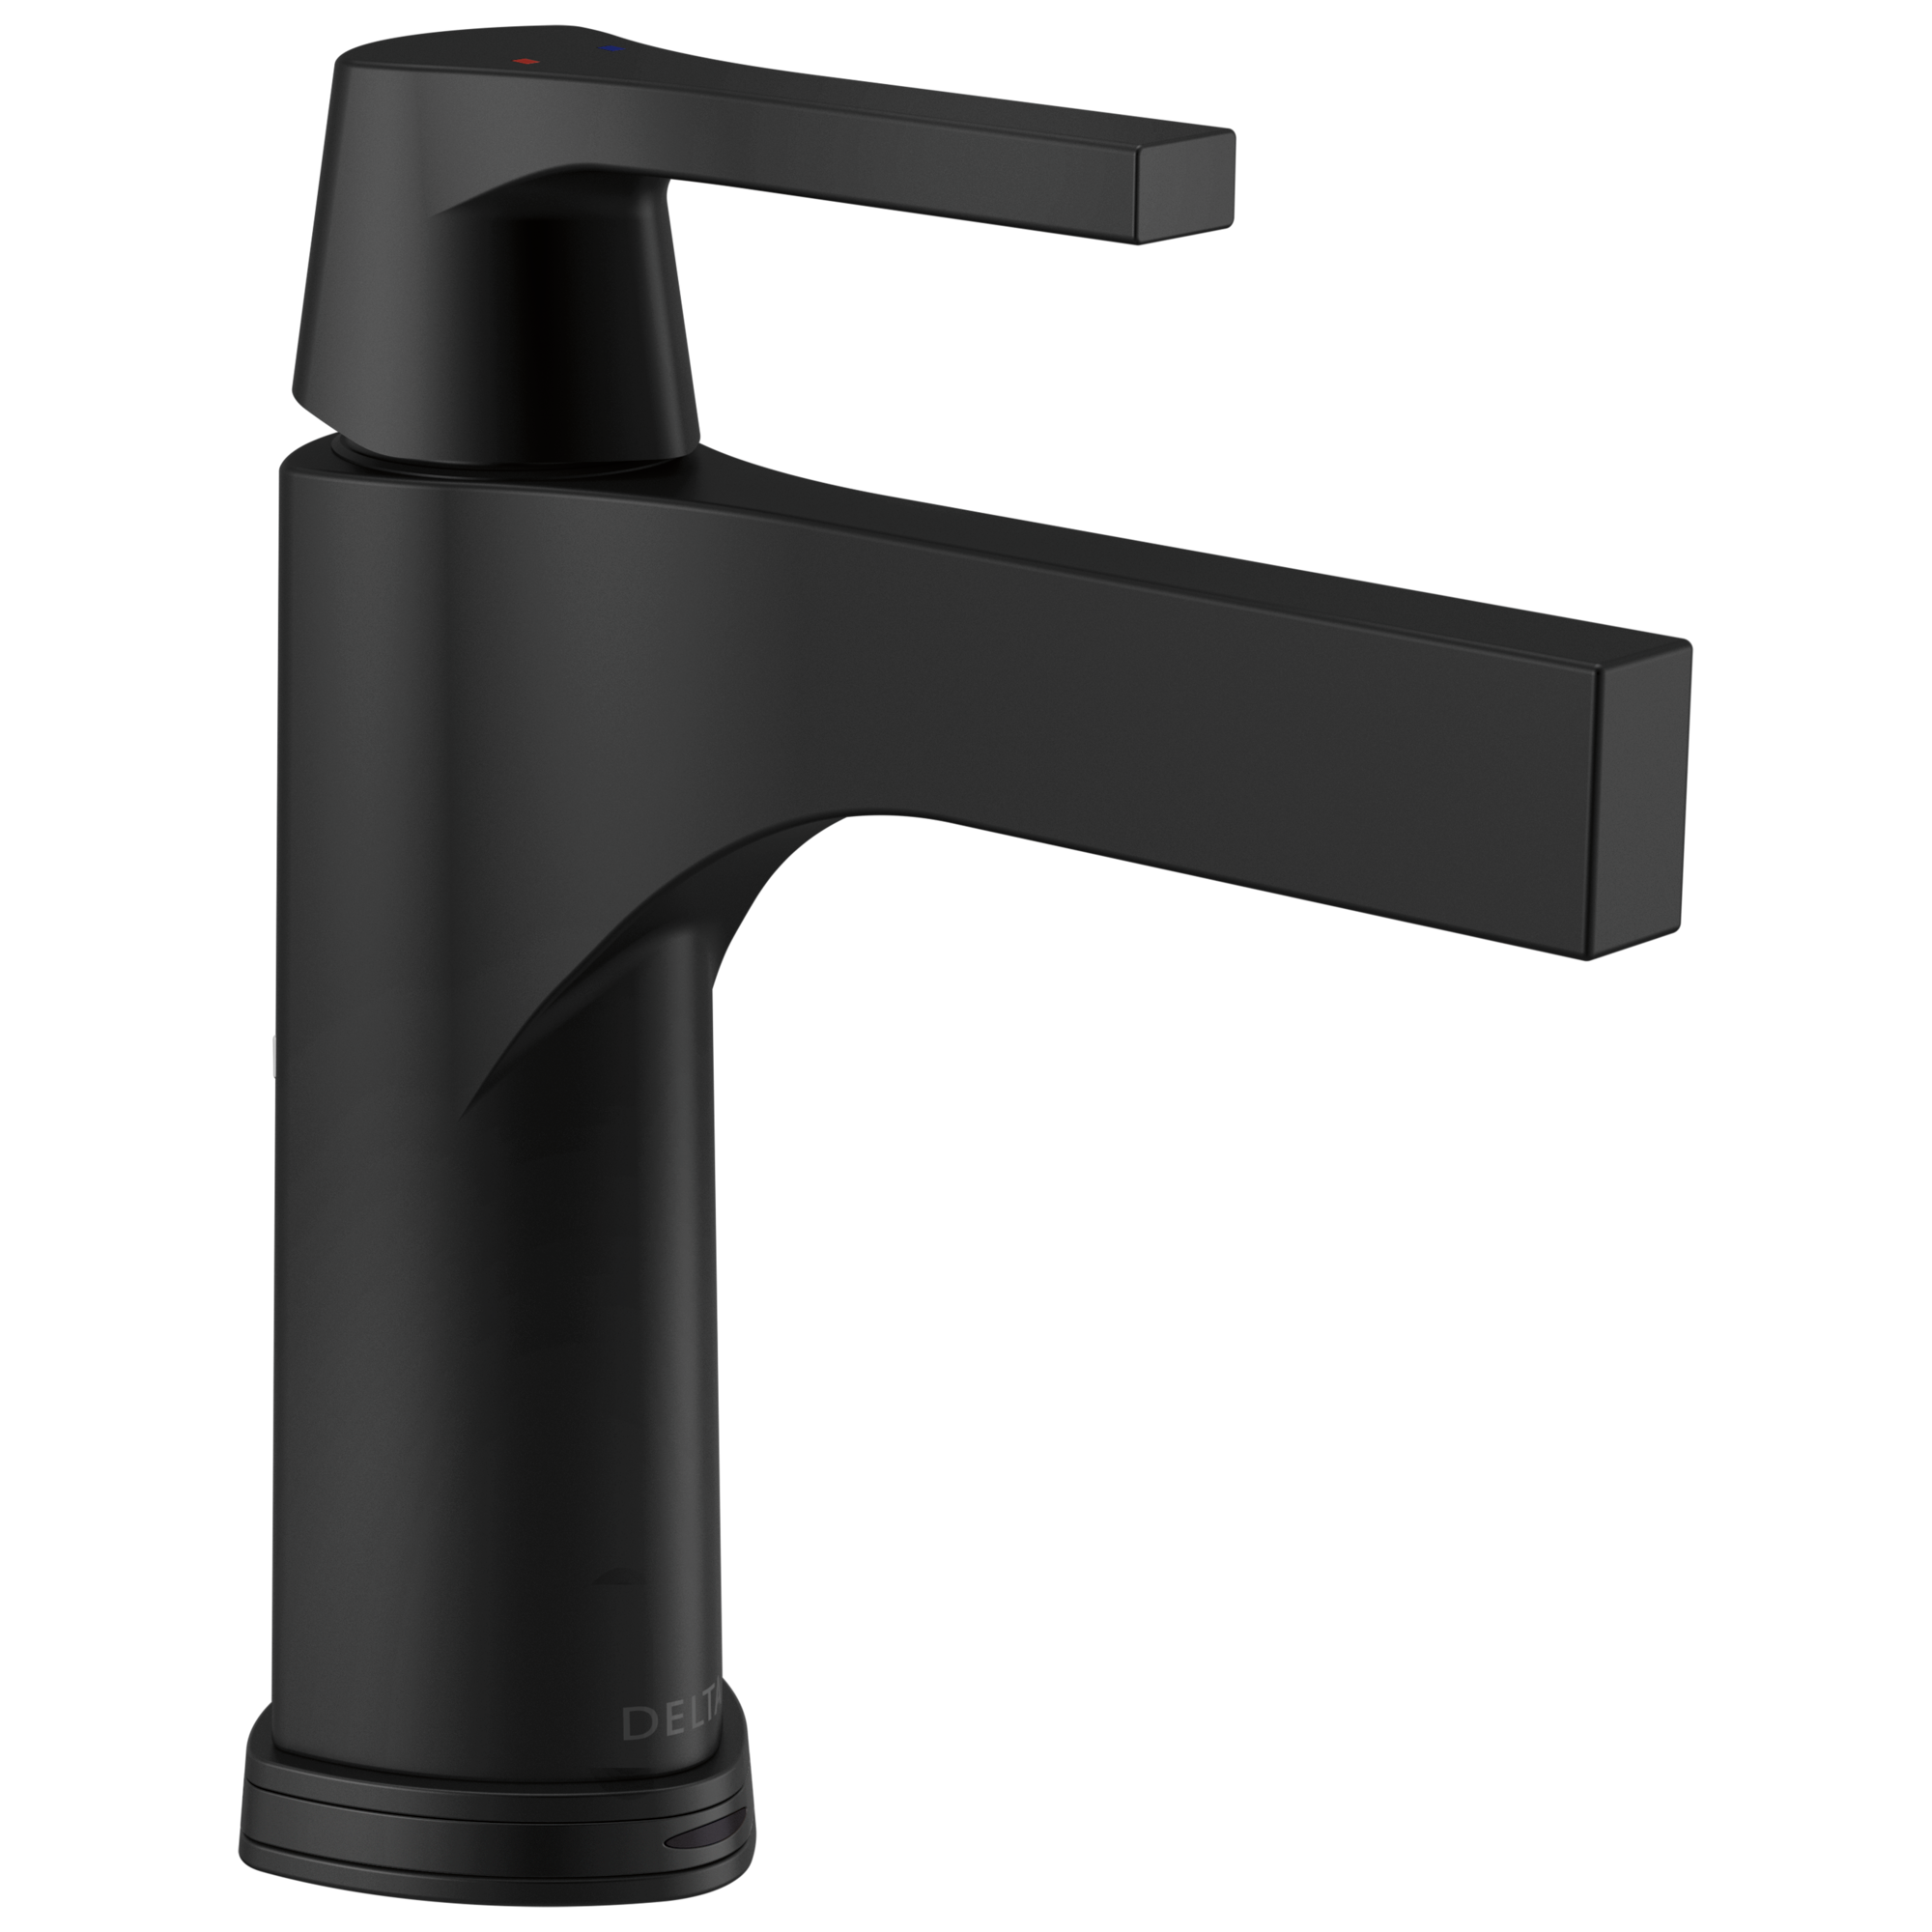 Delta 574T-DST Zura Single Handle Bathroom Faucet with Touch2O Technology